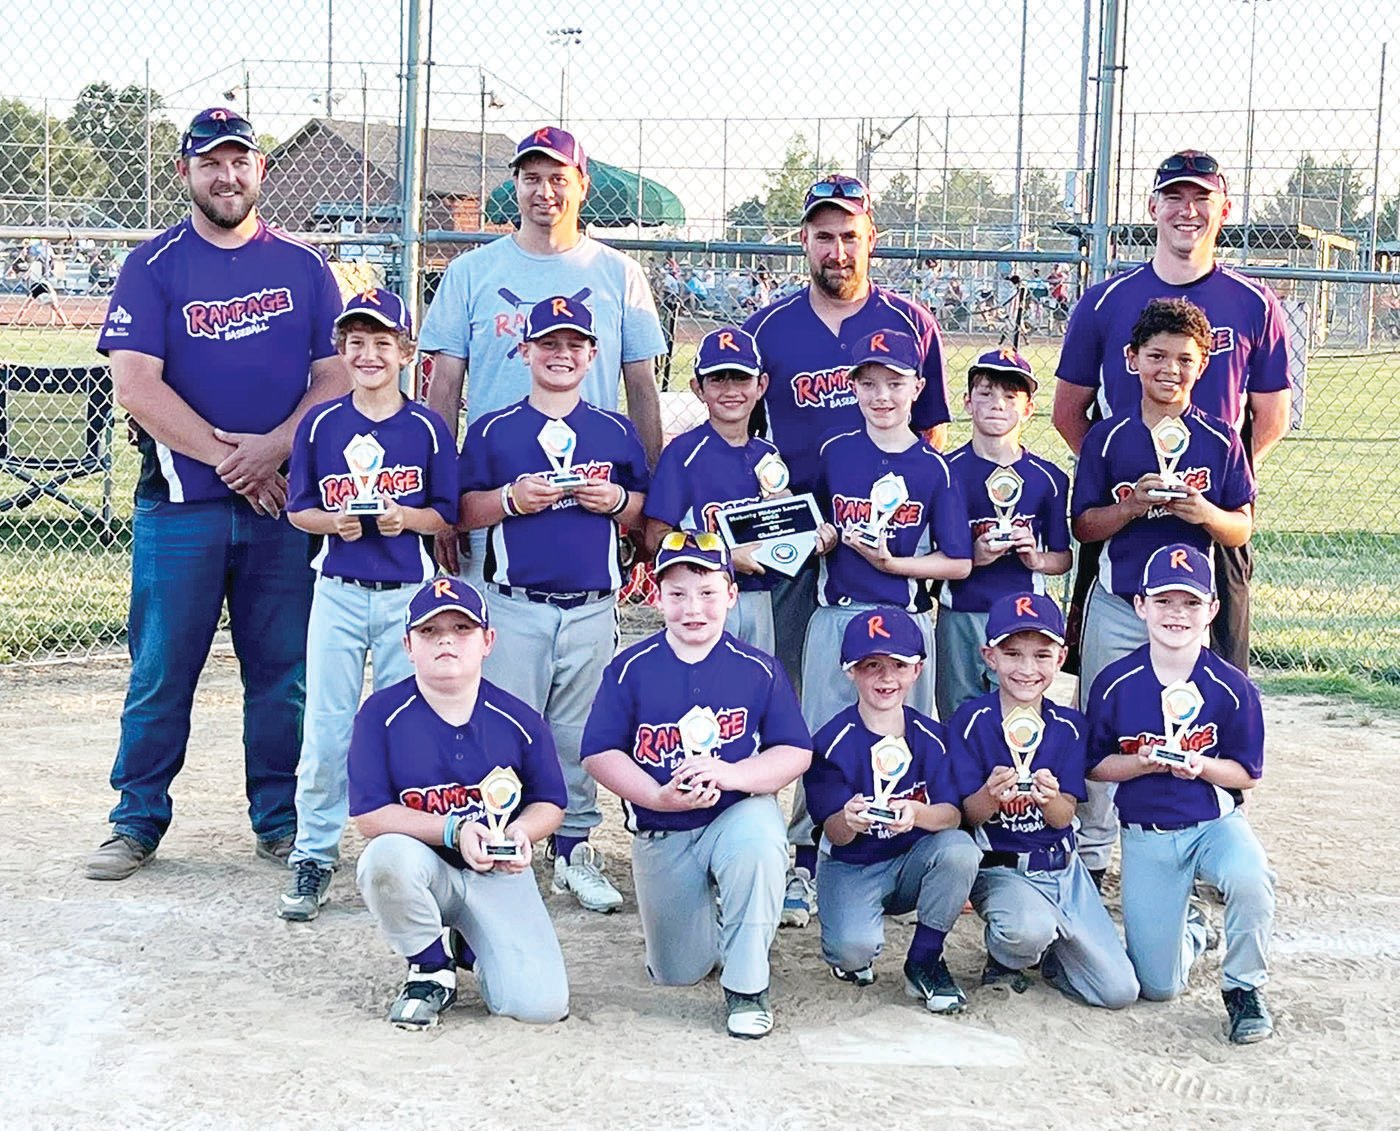 The Rampage, an 8-under team based in Salisbury and Chariton County, won the 8-under division in the Moberly Midget League this summer.